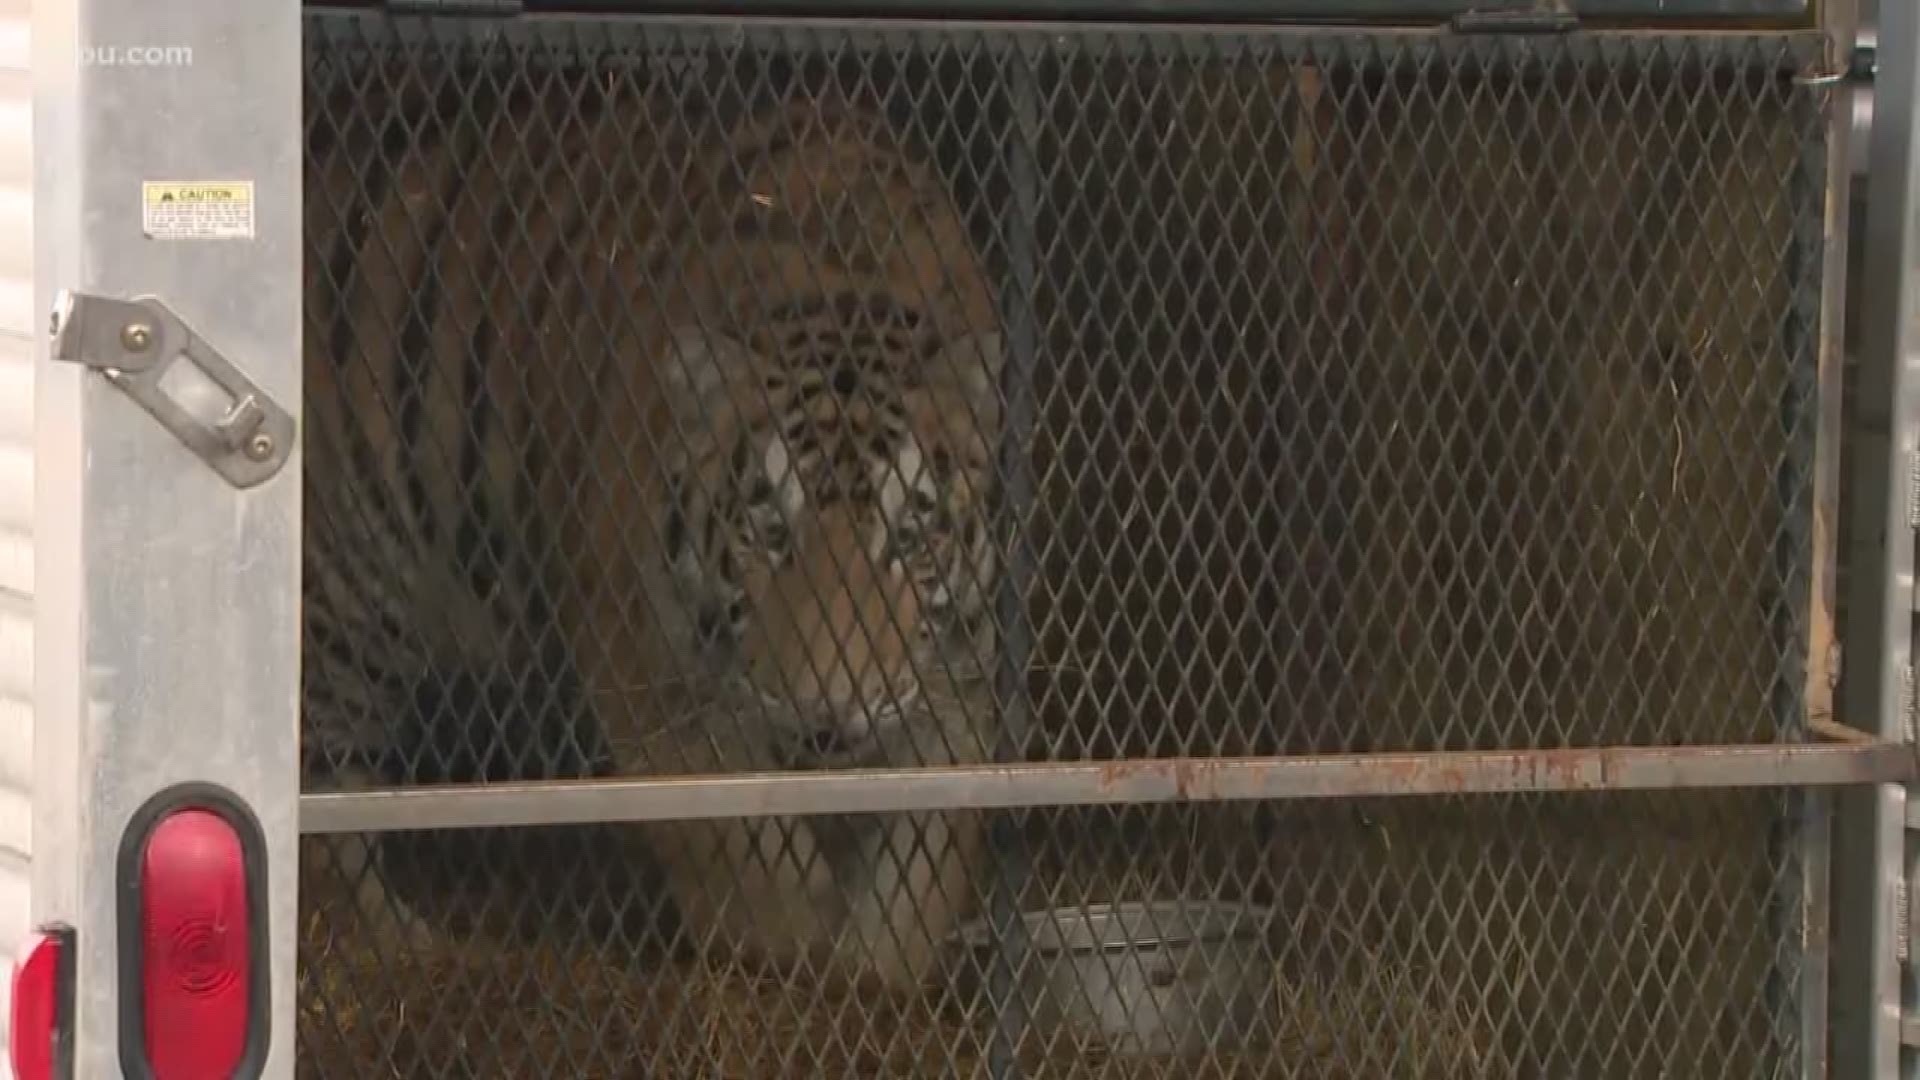 A full grown tiger was found inside of an abandoned Southeast Houston home and is on its way to a sanctuary. Plus, Cy-Fair ISD is looking to expand and the state's largest school district wants to make sure its schools are safe and secure.